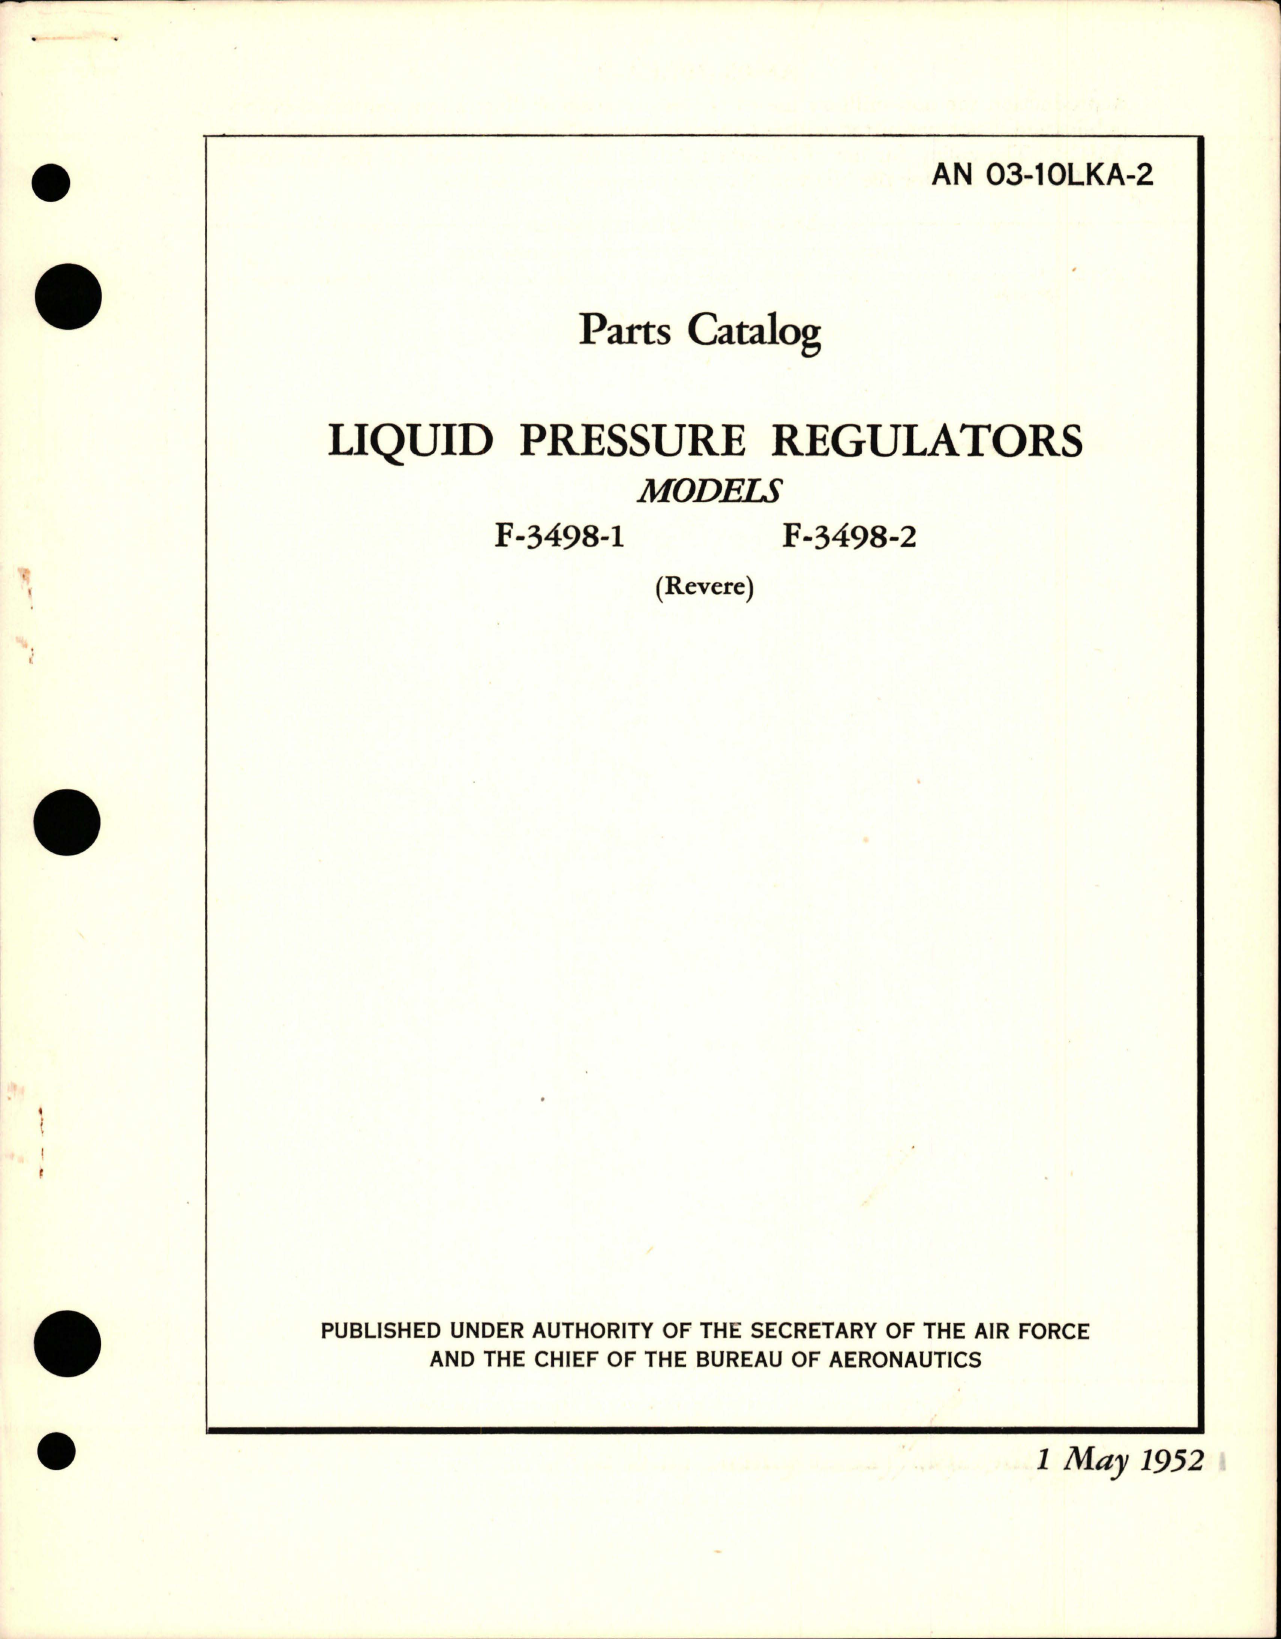 Sample page 1 from AirCorps Library document: Parts Catalog for Liquid Pressure Regulators - Models F-3498-1 and F-3498-2